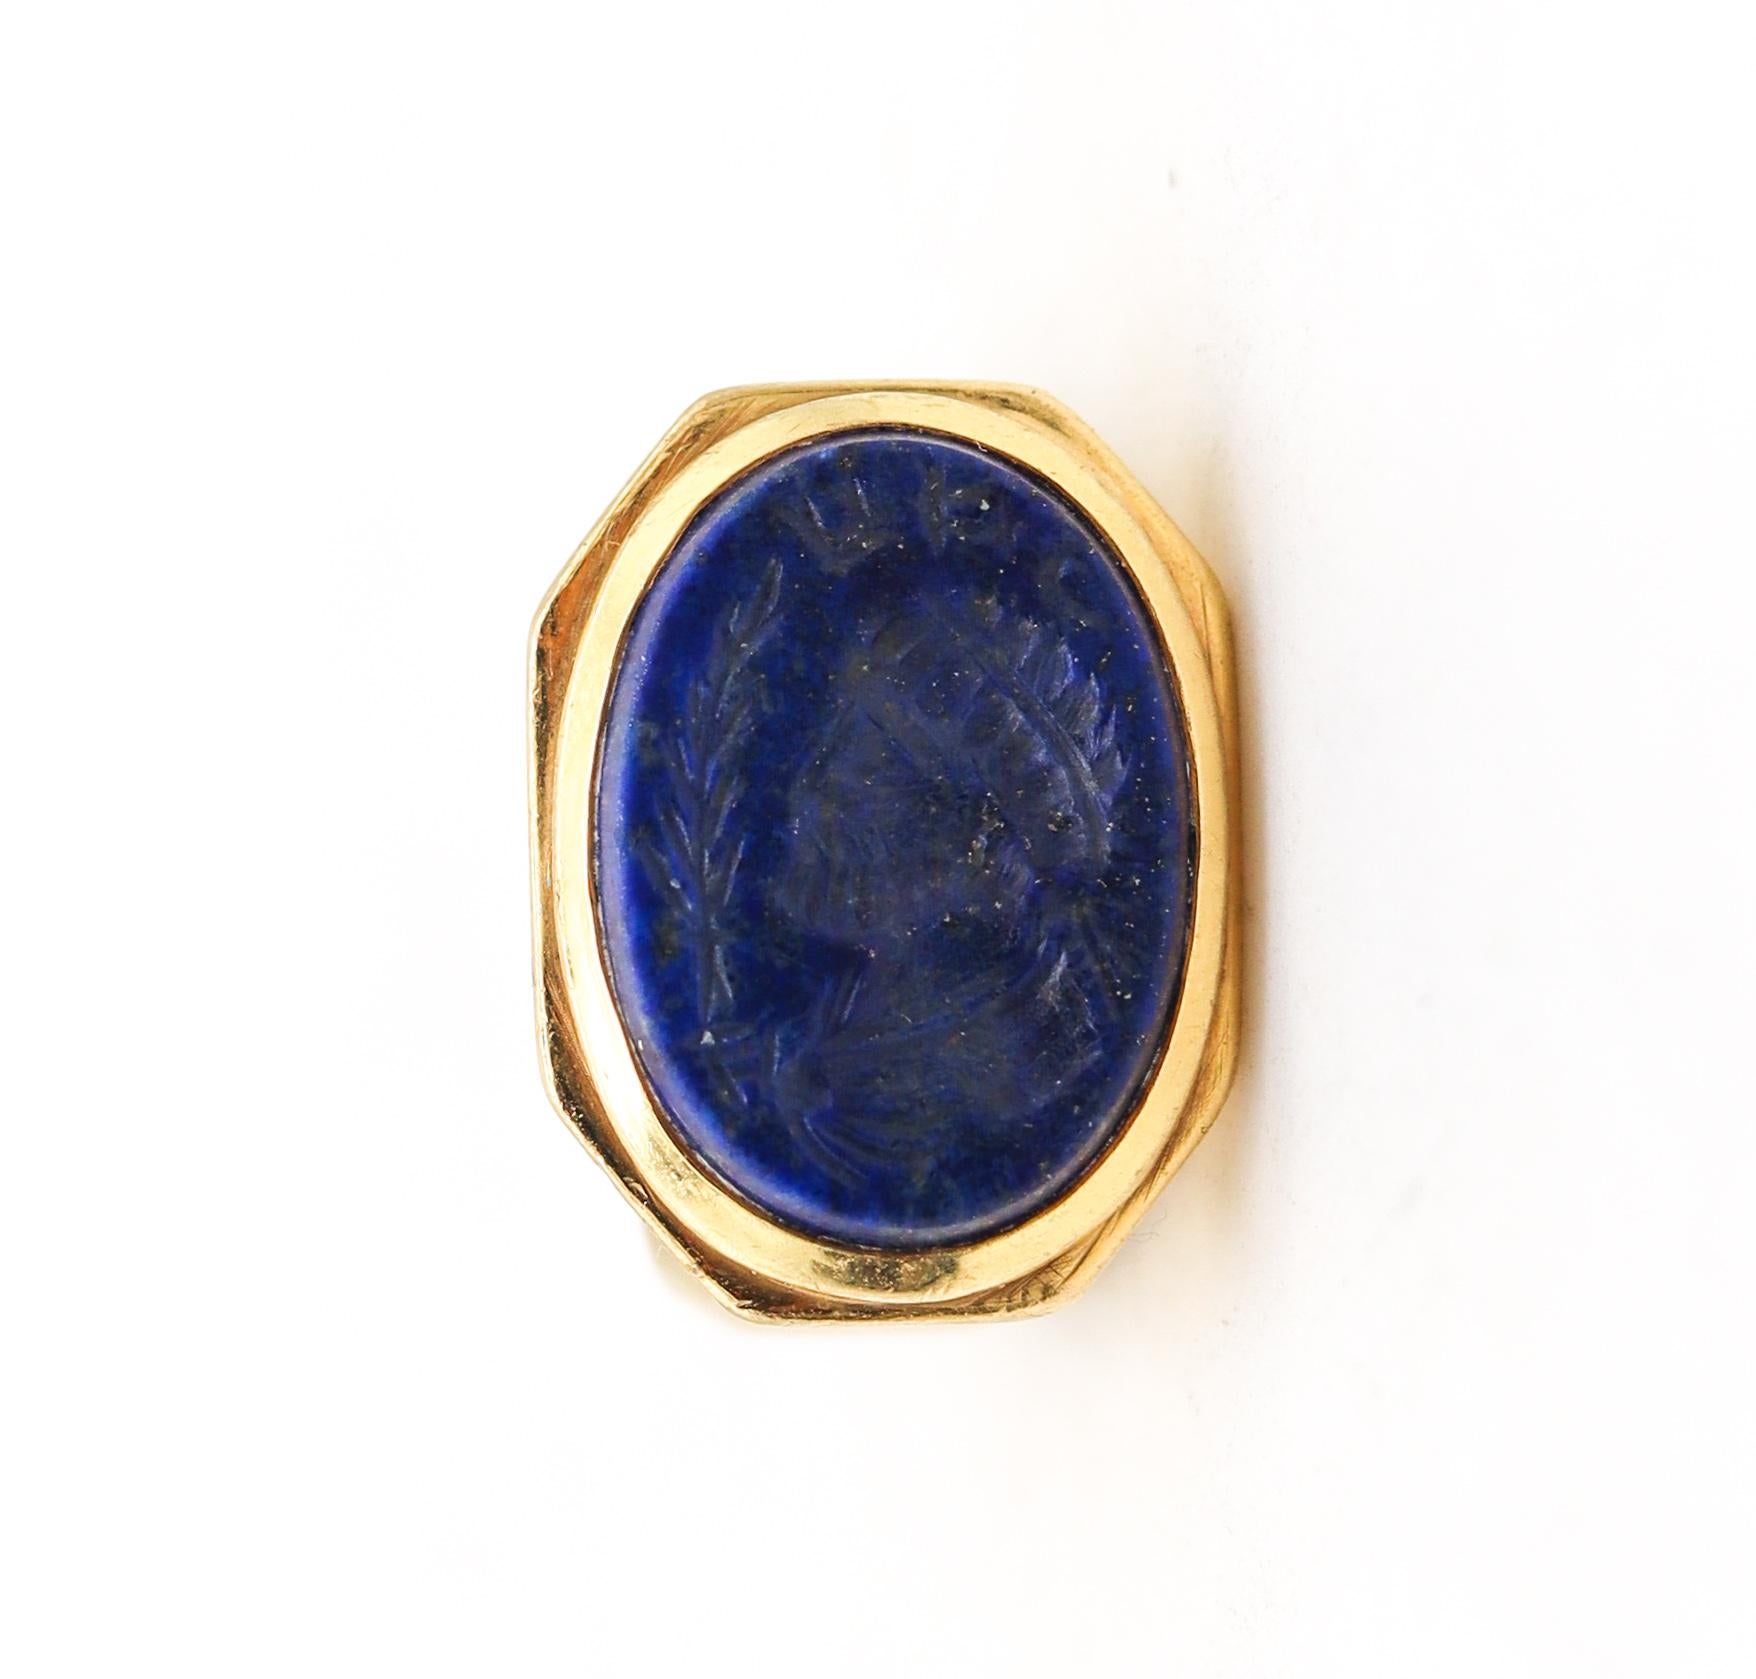 Renaissance Revival Signet Ring Revival Intaglio in Solid 18kt Yellow Gold with Carved Lapis Lazuli